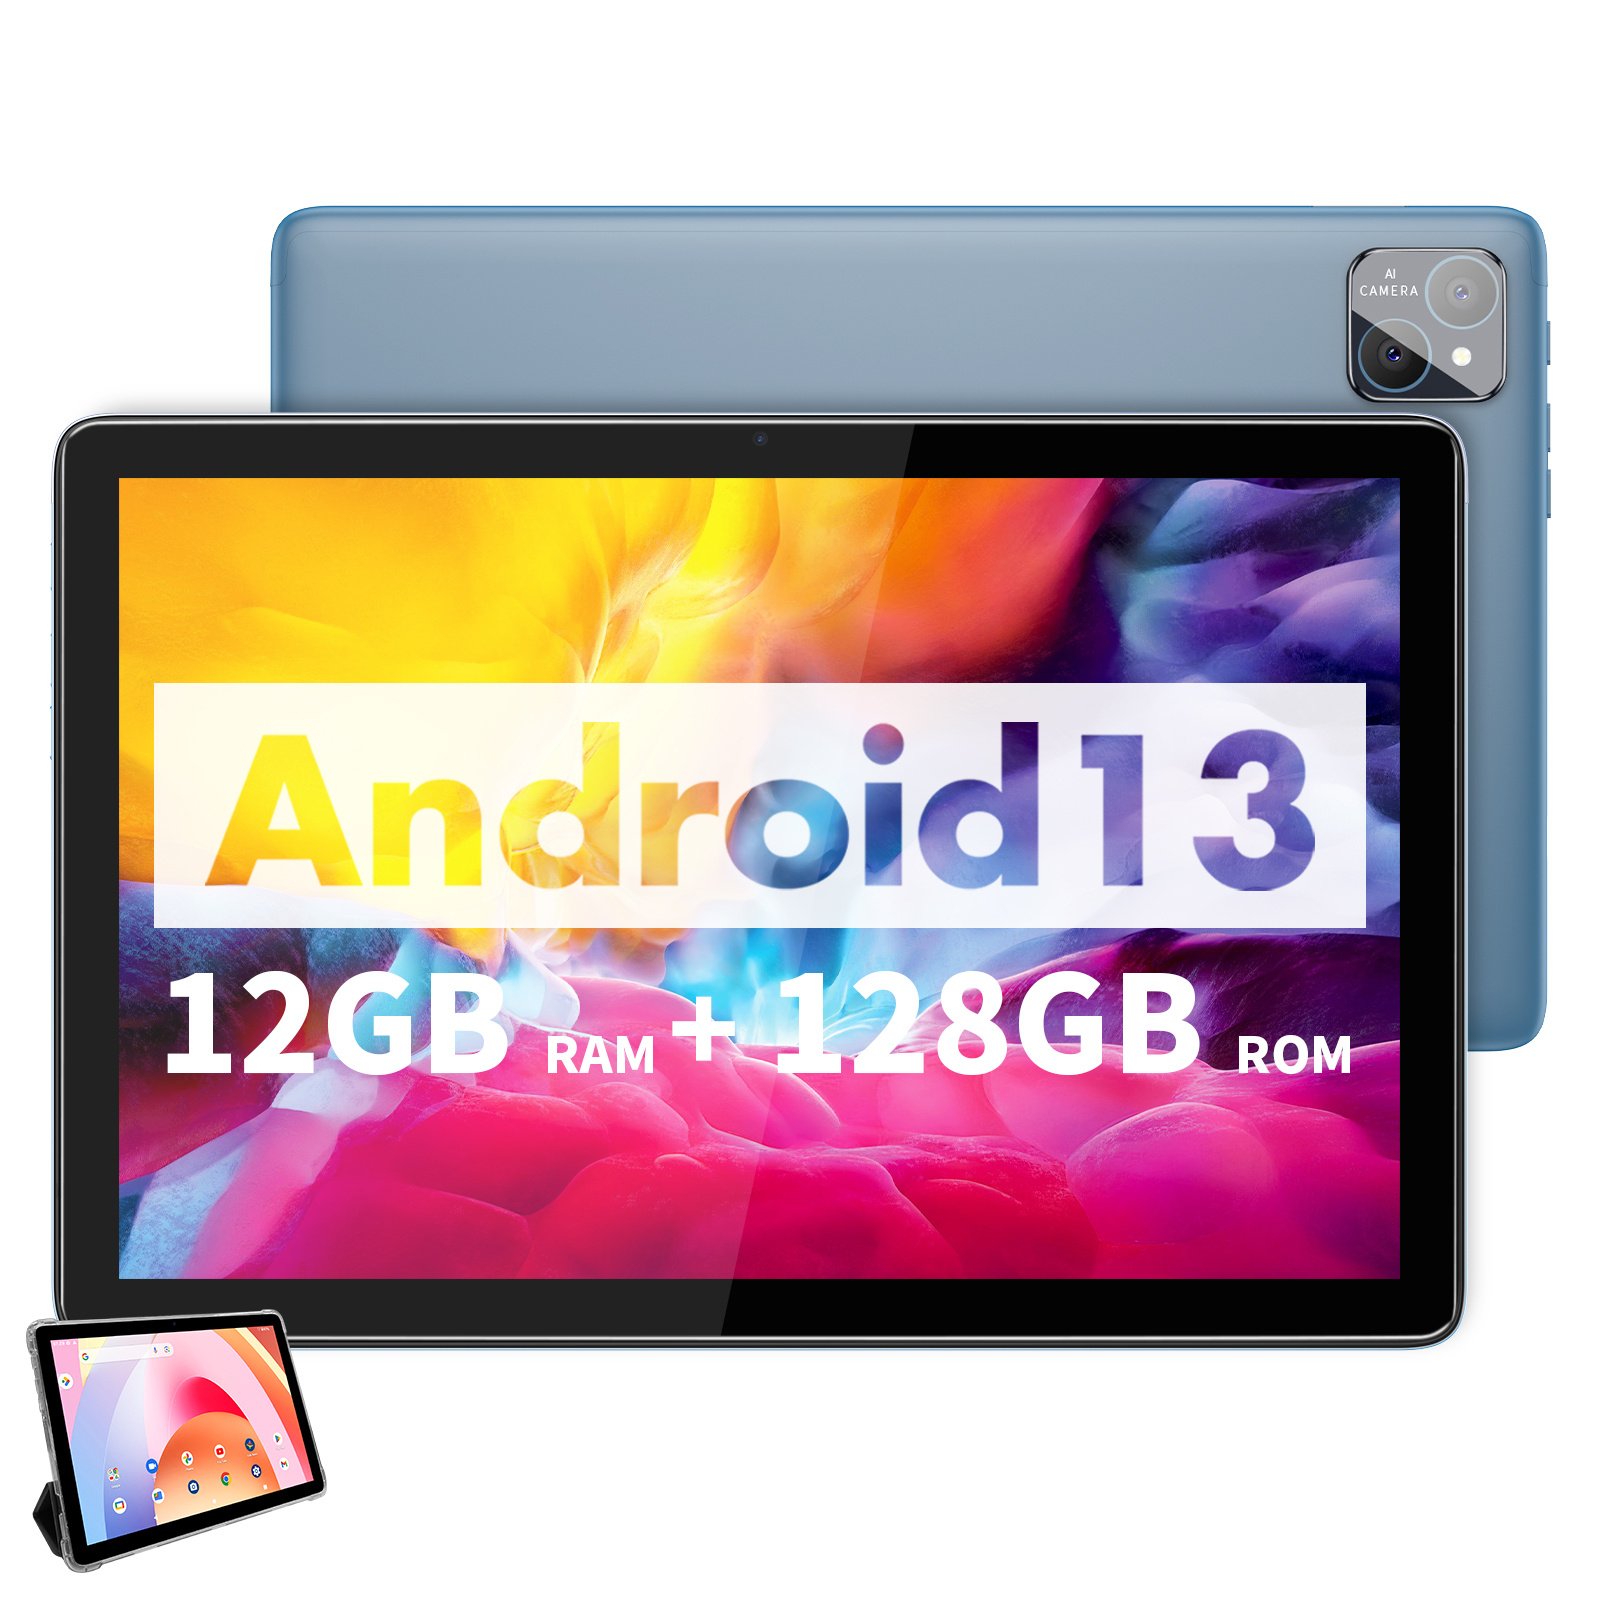 10 inch 12gb+512gb android tablet pc